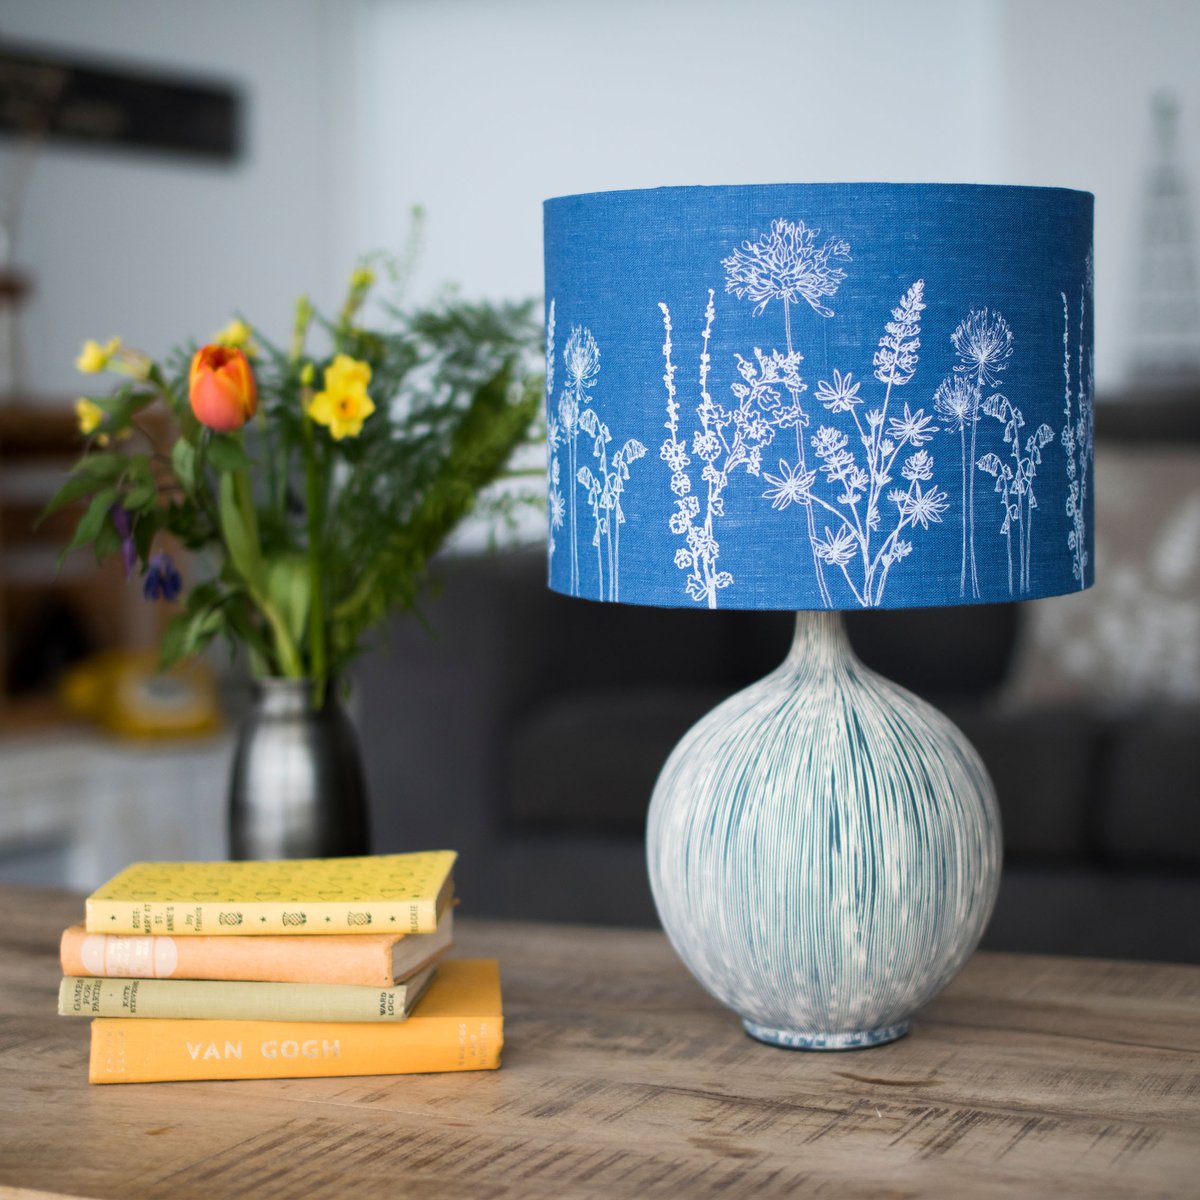 Great to see we have been featured for our lovely Indigo Blue Linen Lampshade! Thanks, GoodHomesMagazine.com @pressloft